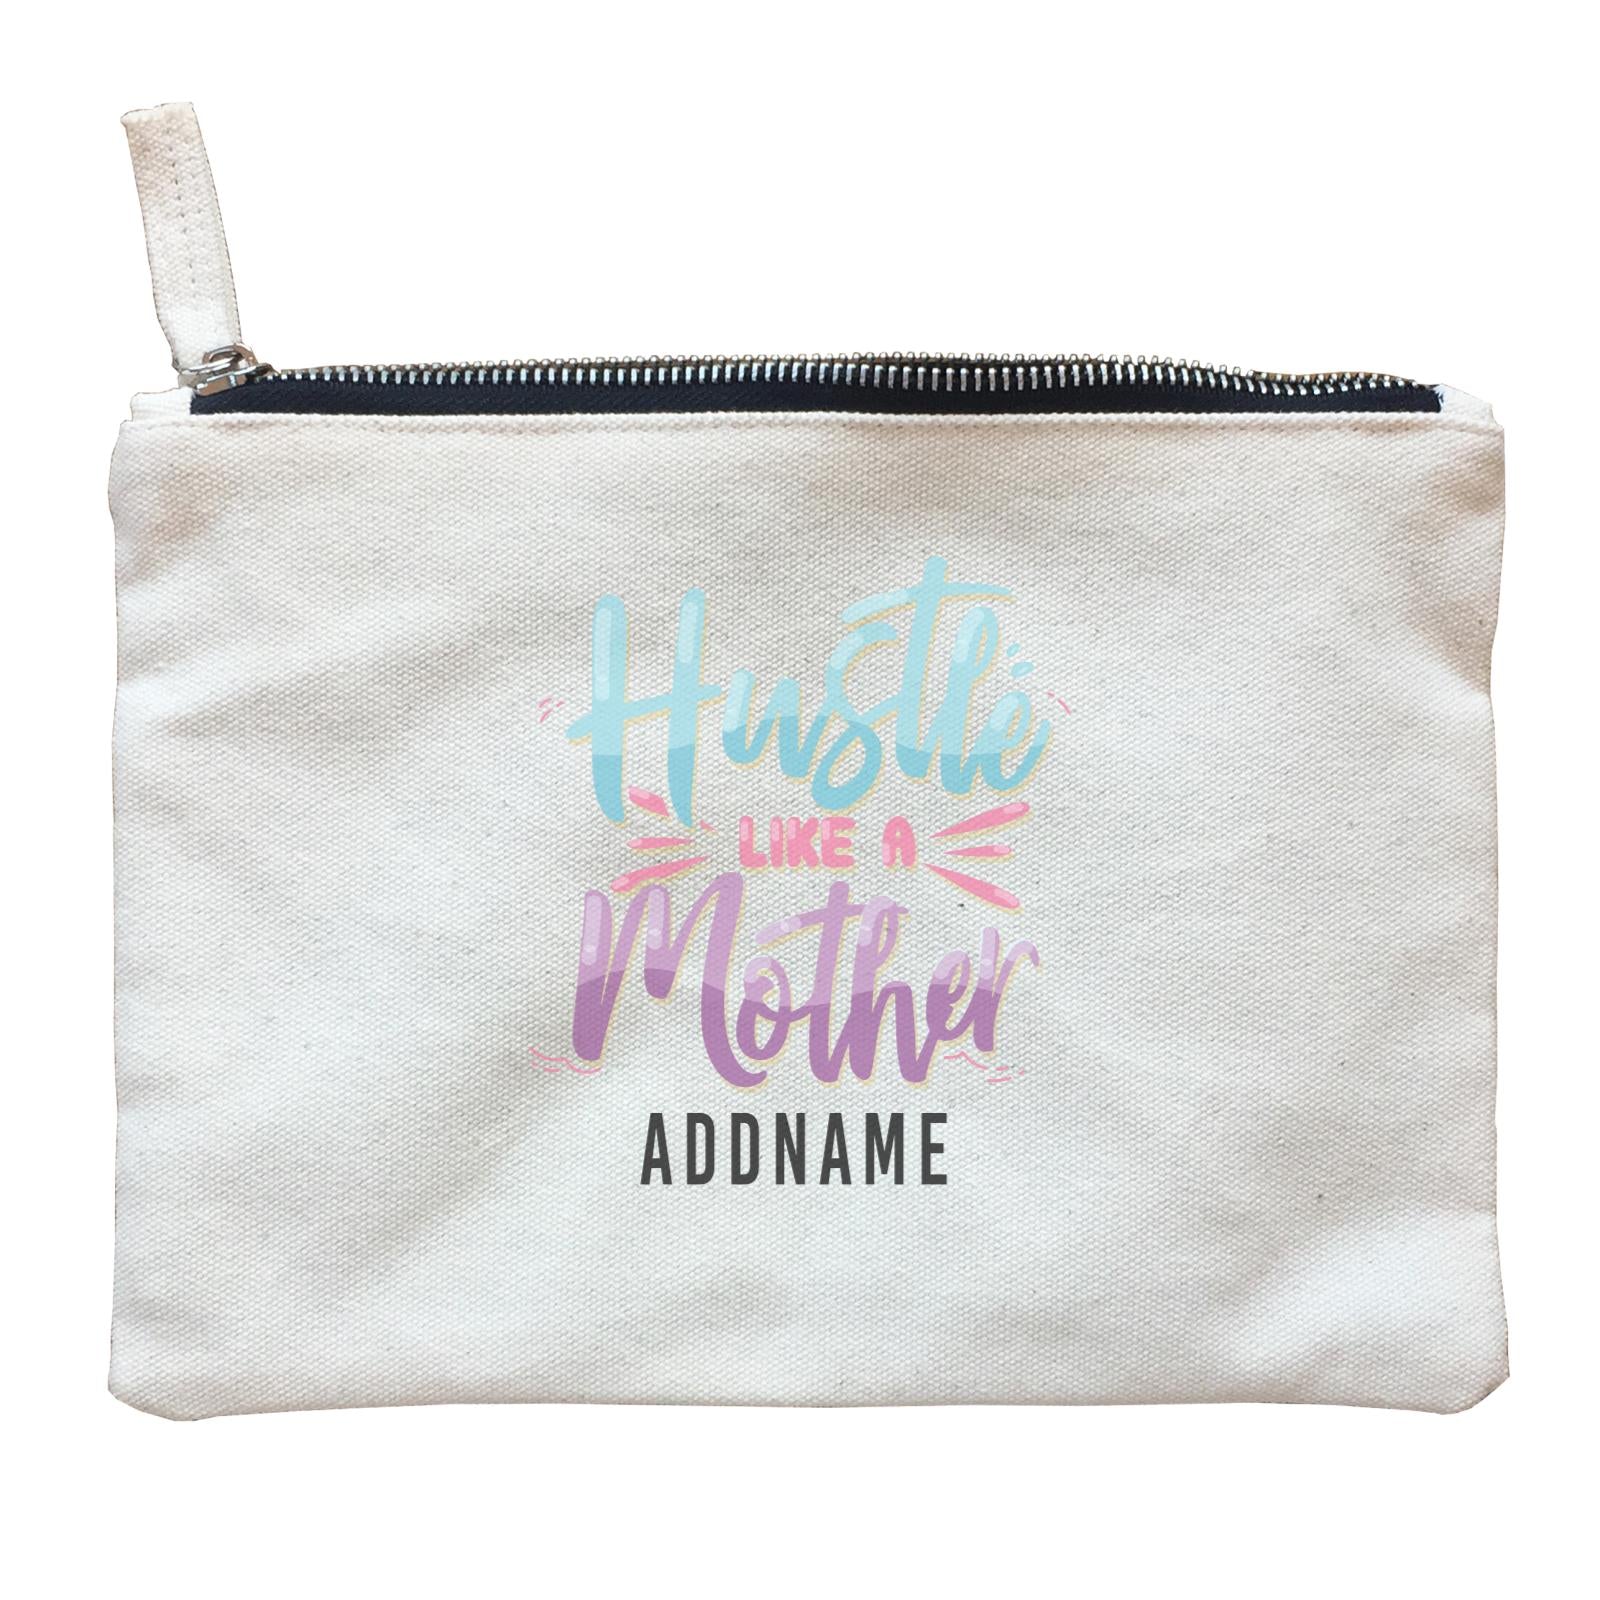 Mother's Day - Hustle like a Mother Zipper Pouch